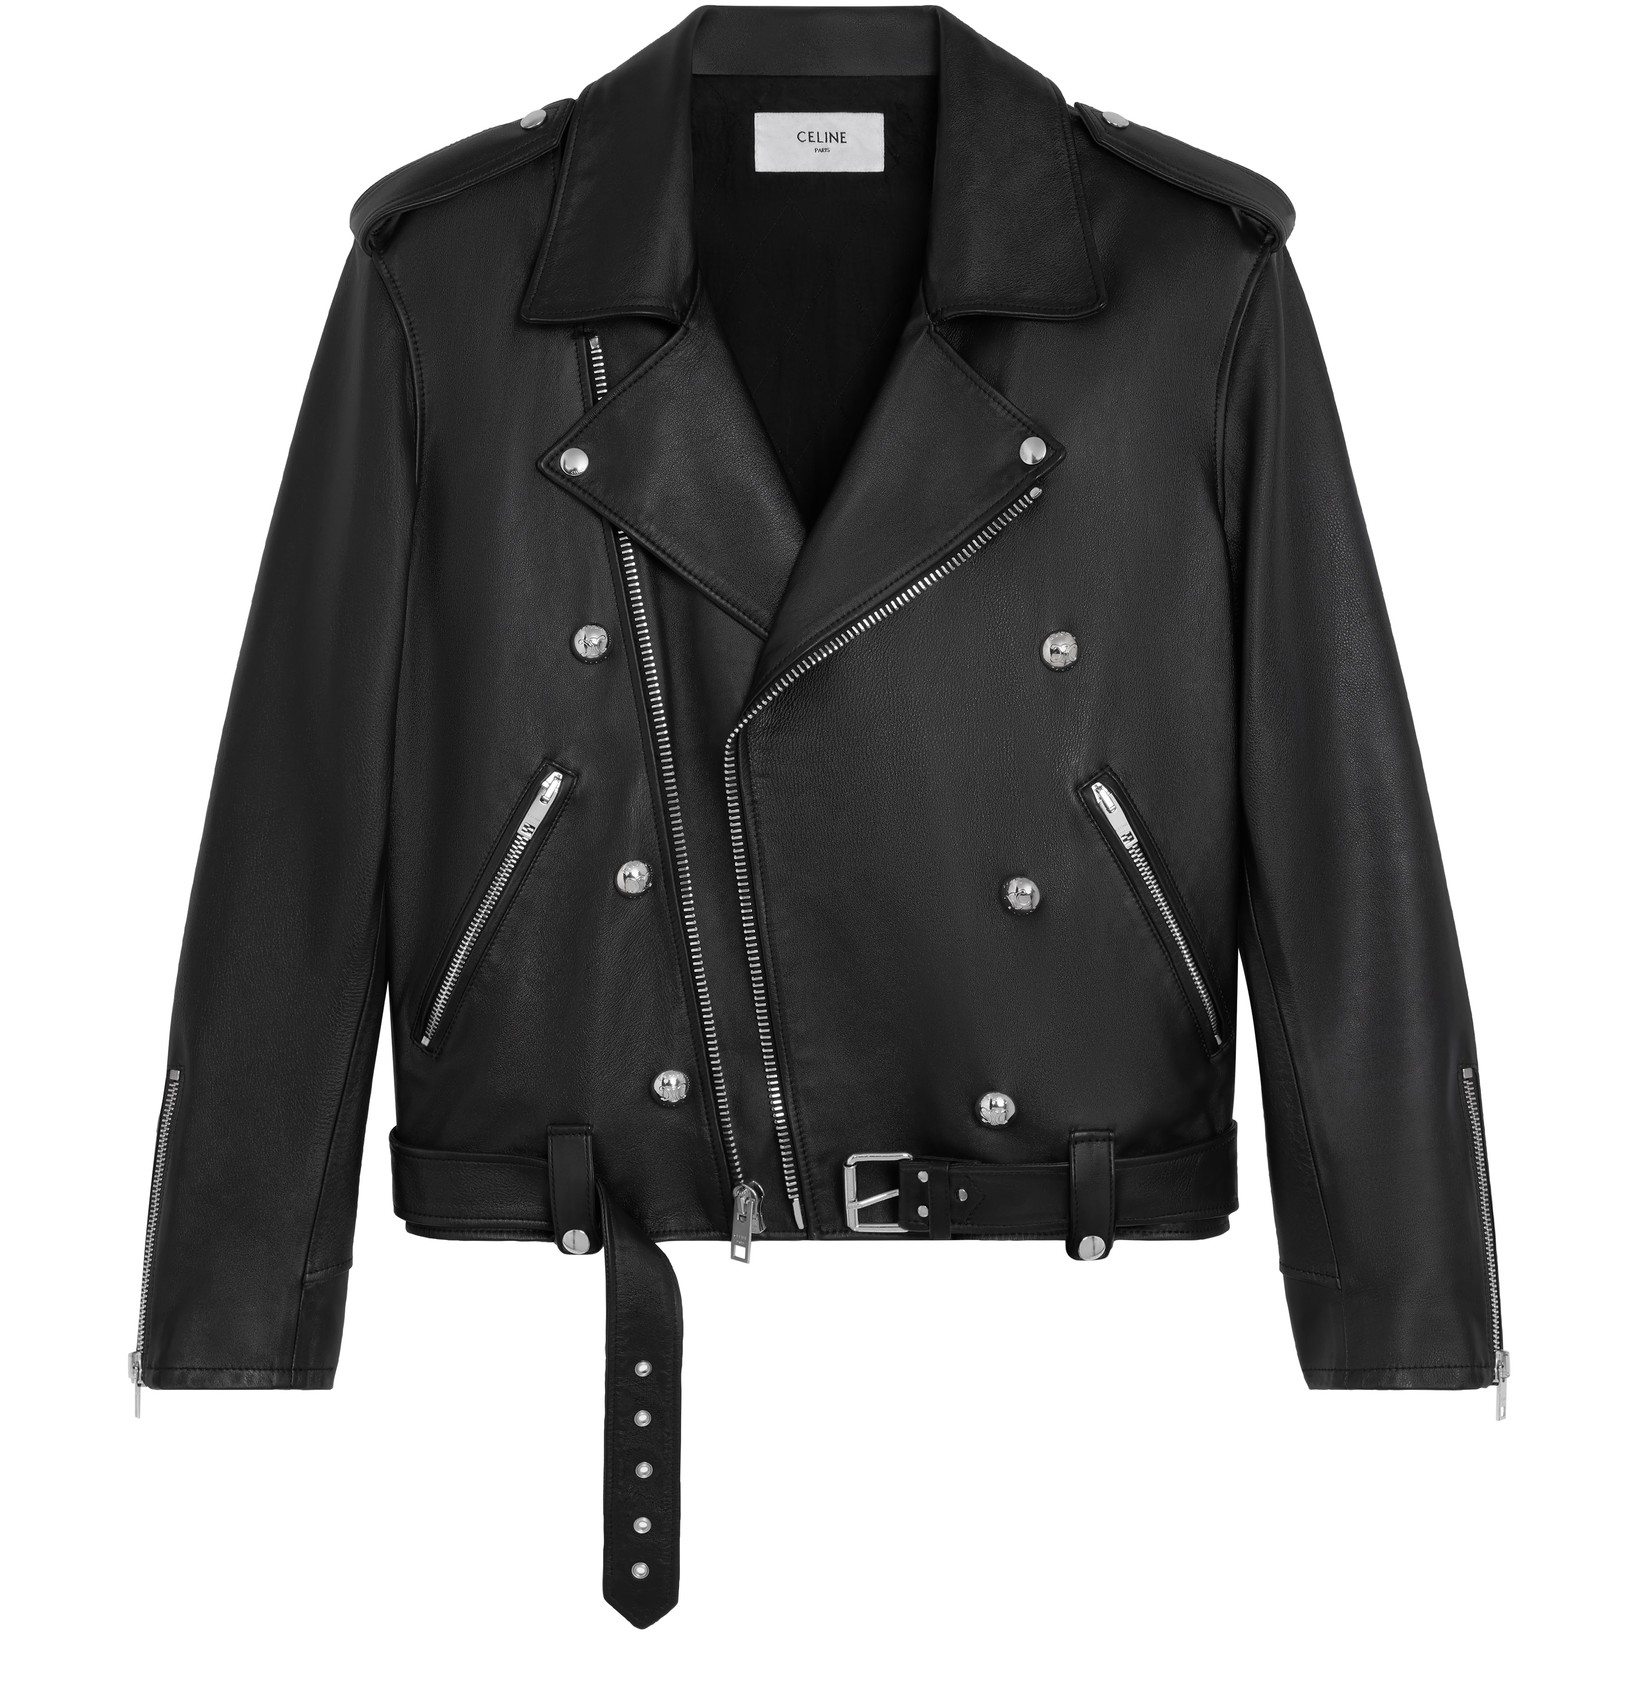 A black leather jacket with a belt Description automatically generated